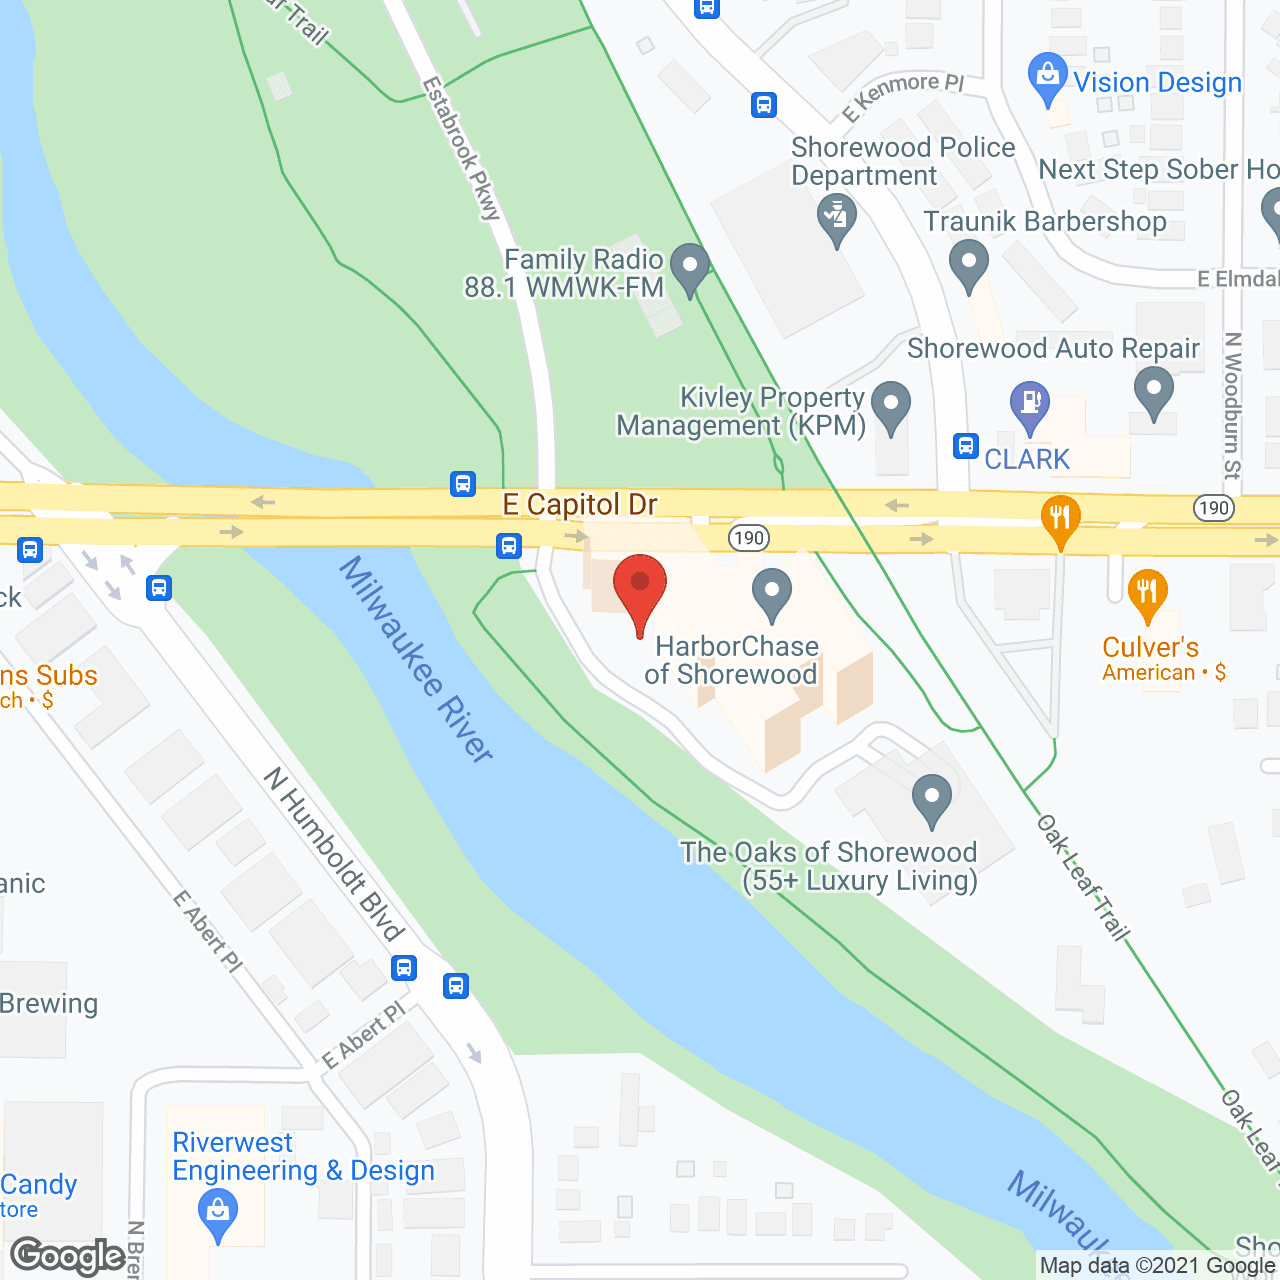 HarborChase of Shorewood in google map